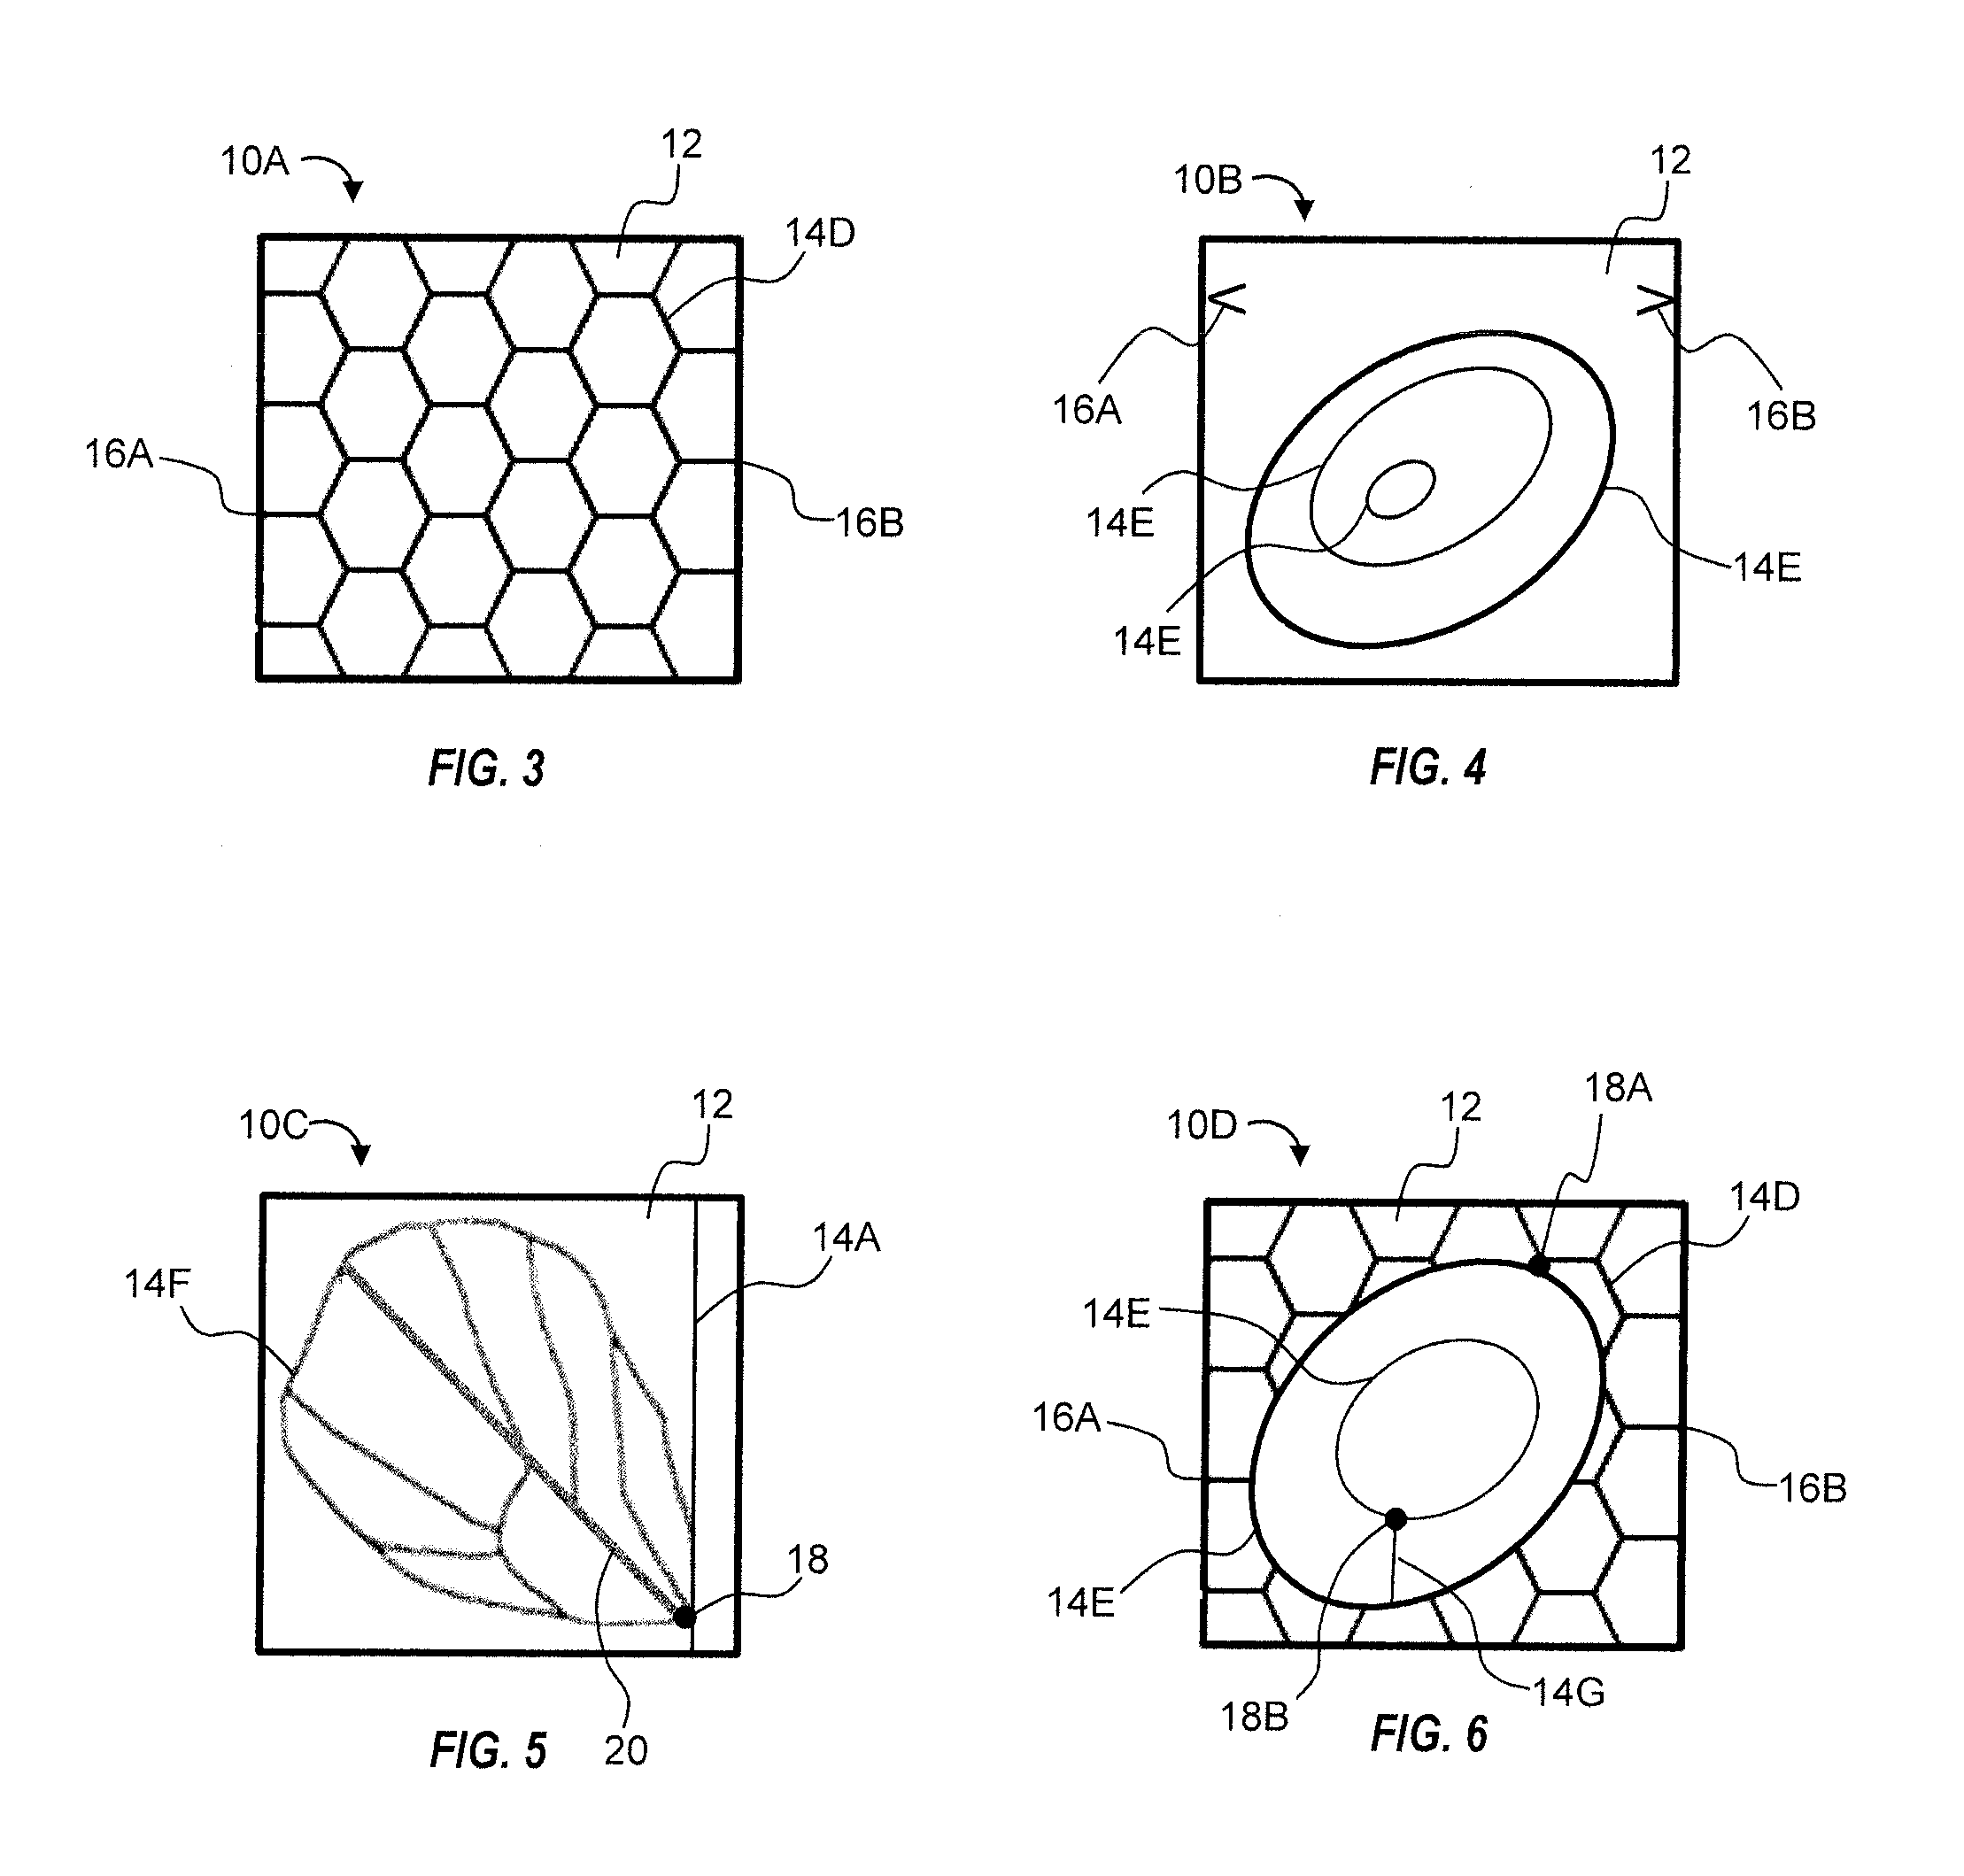 Method for Manufacturing a Thin Film Structural System